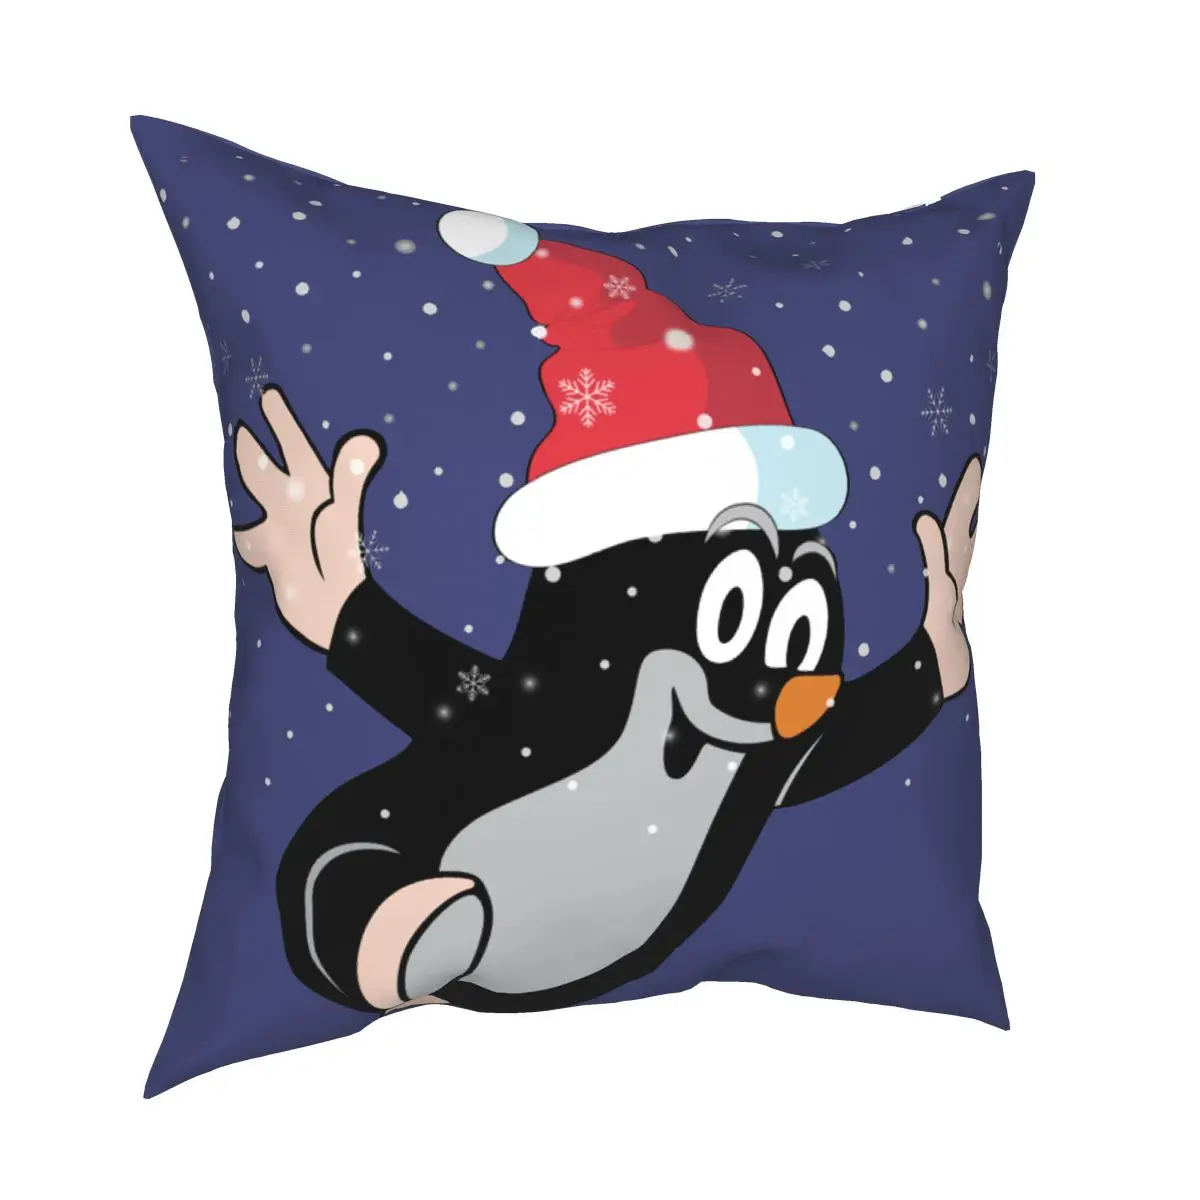 Merry Christmas Mole Pillowcover Home Decorative Cushion Cover Throw Pillow for Car Polyester Double-sided Printing Unique